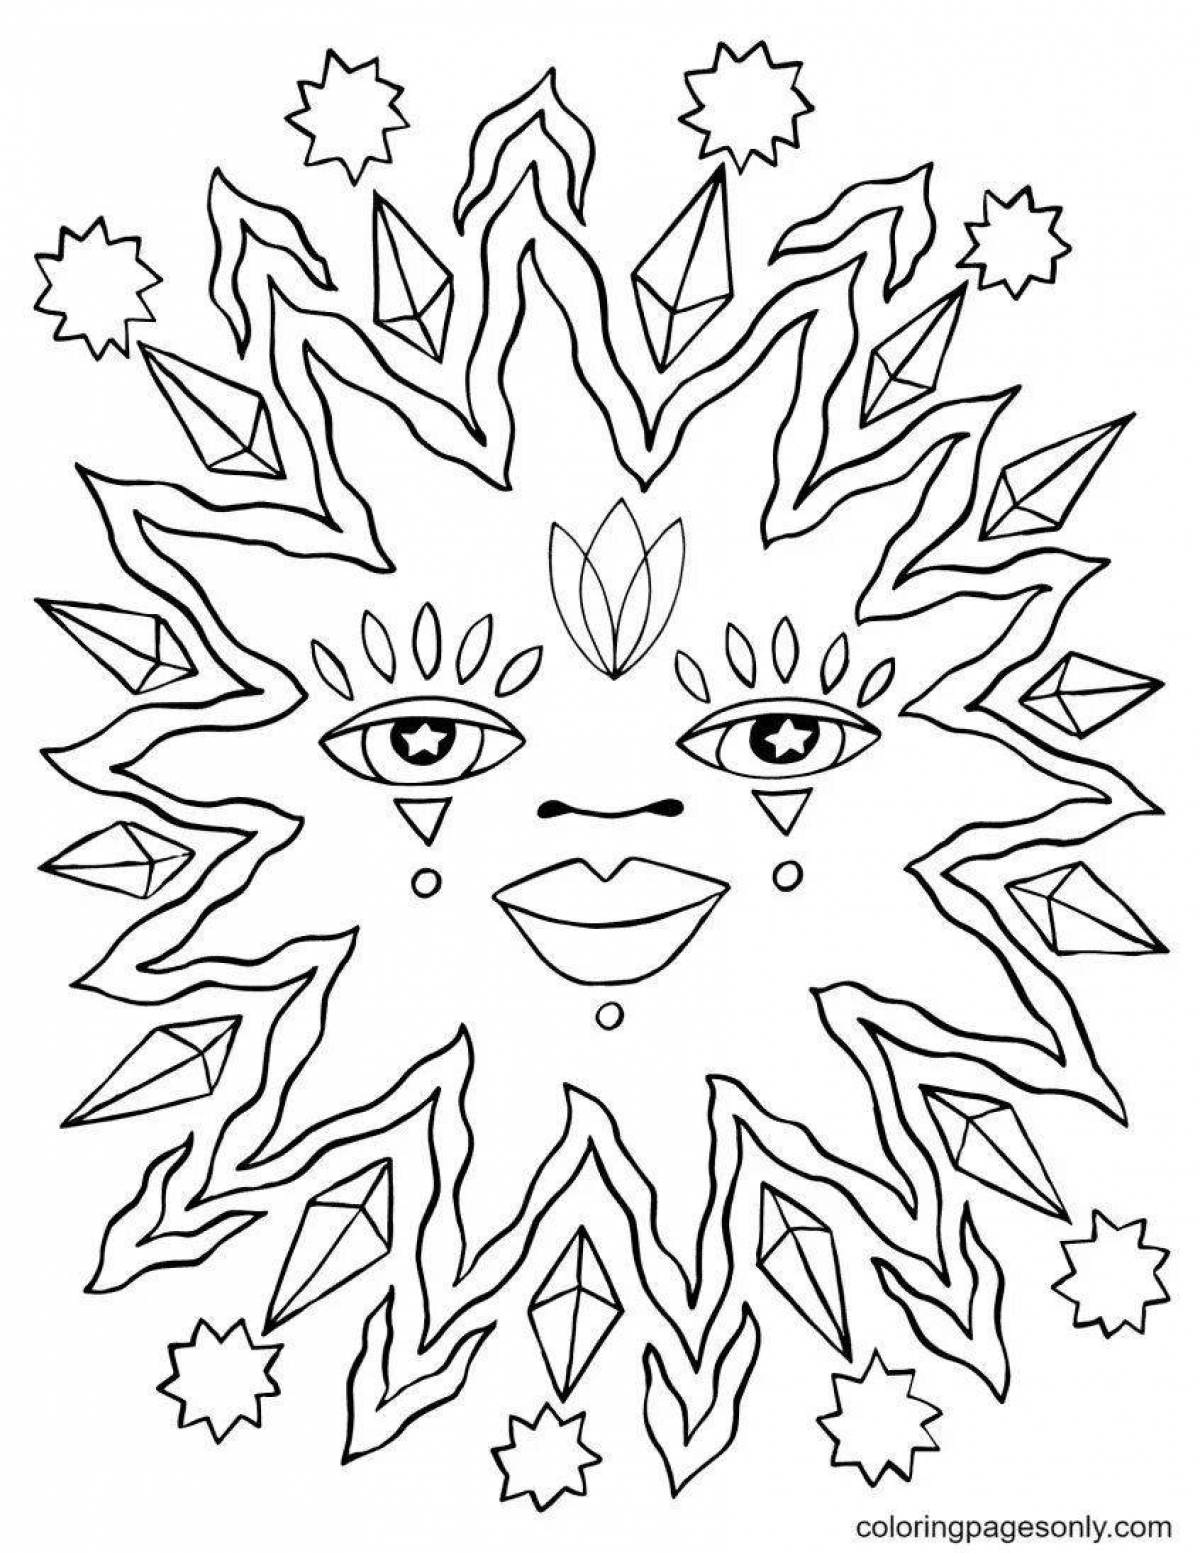 Children's moon and sun coloring book for kids